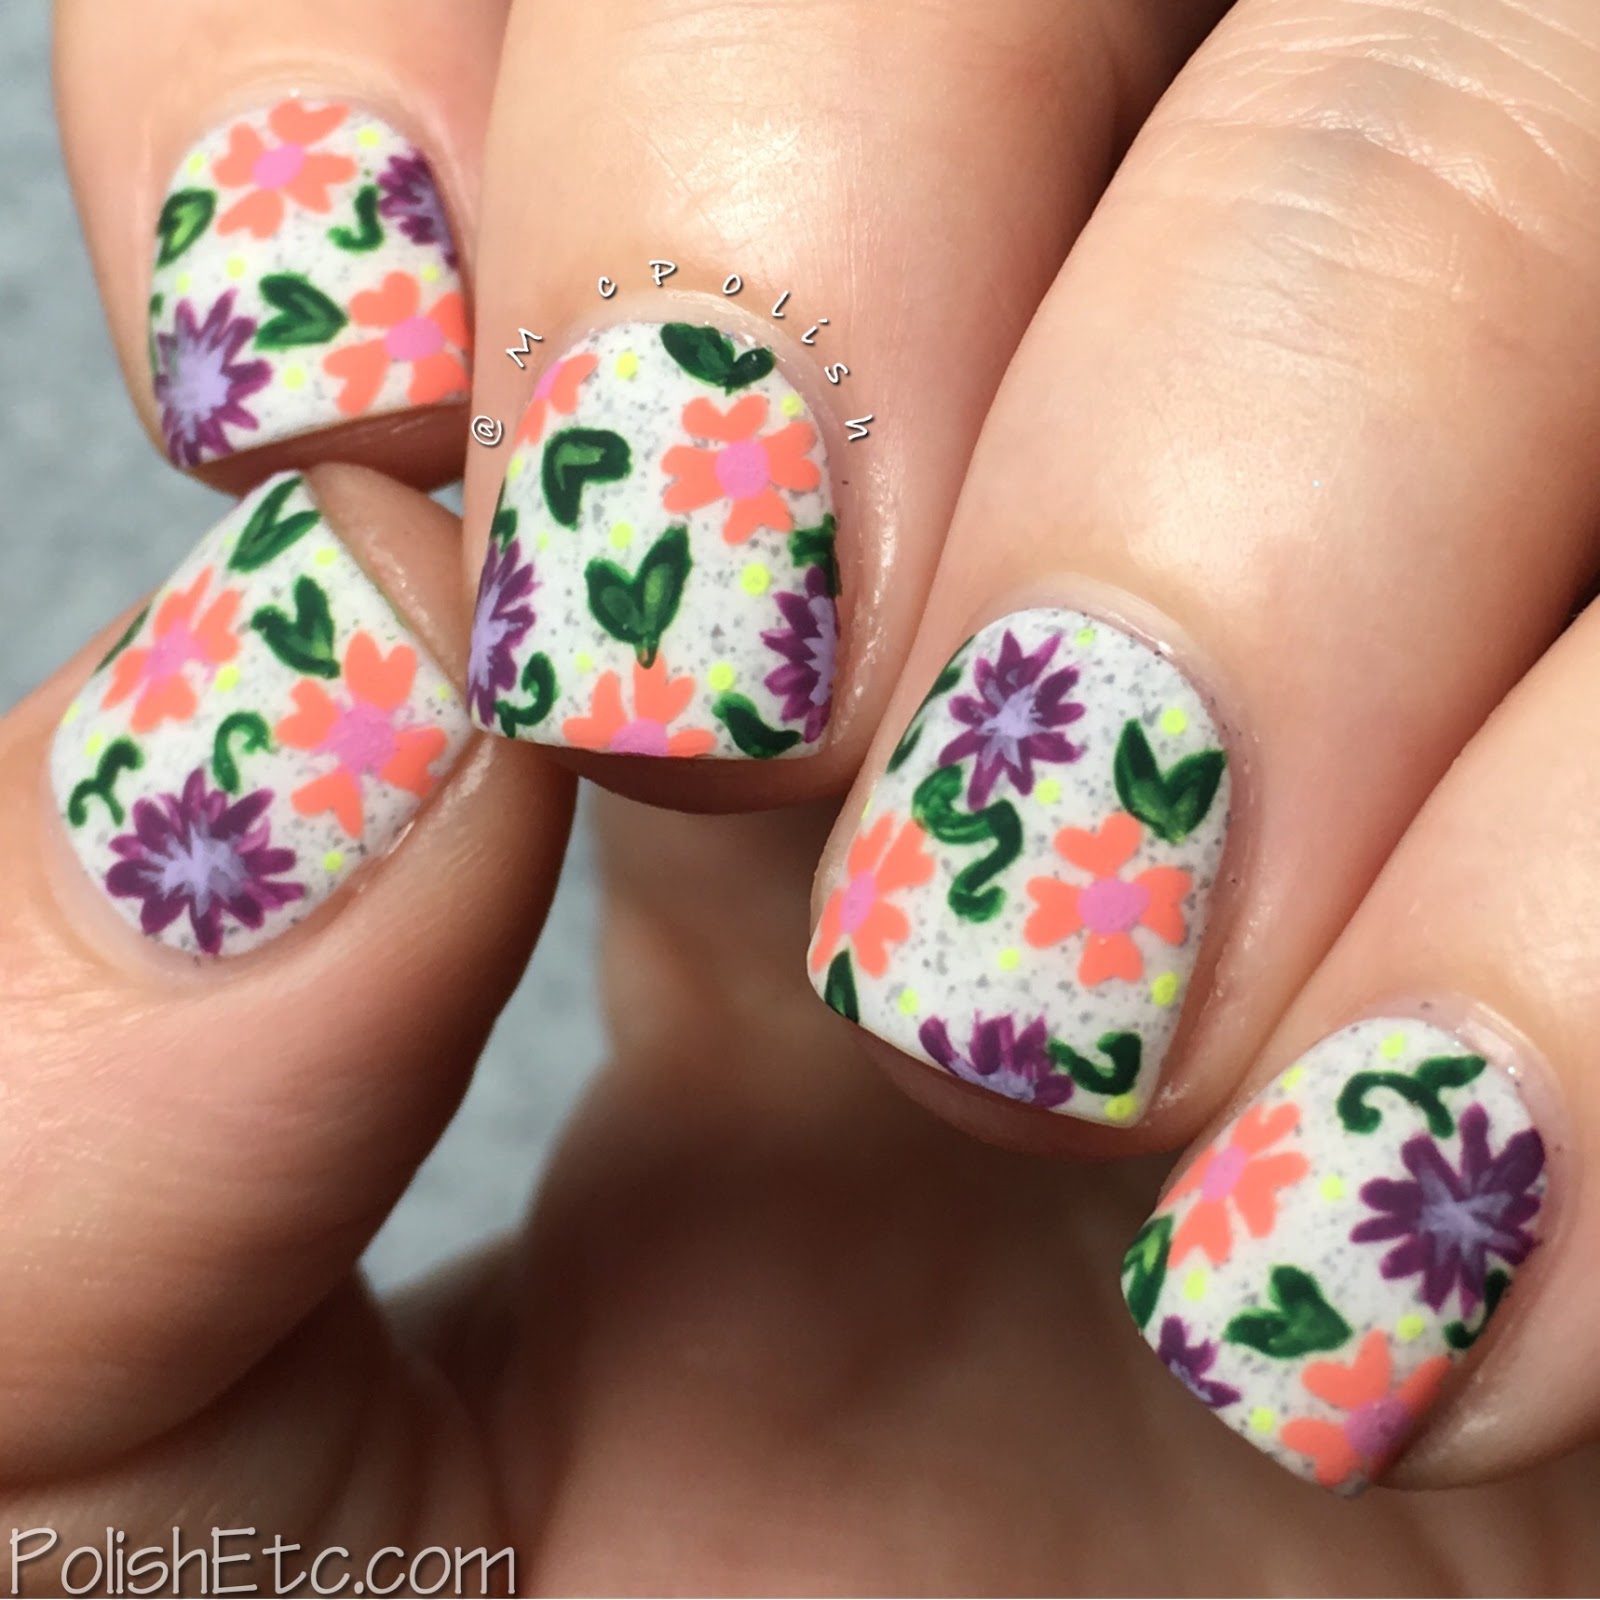 Floral Nails for the #31DC2016Weekly - Polish Etc.